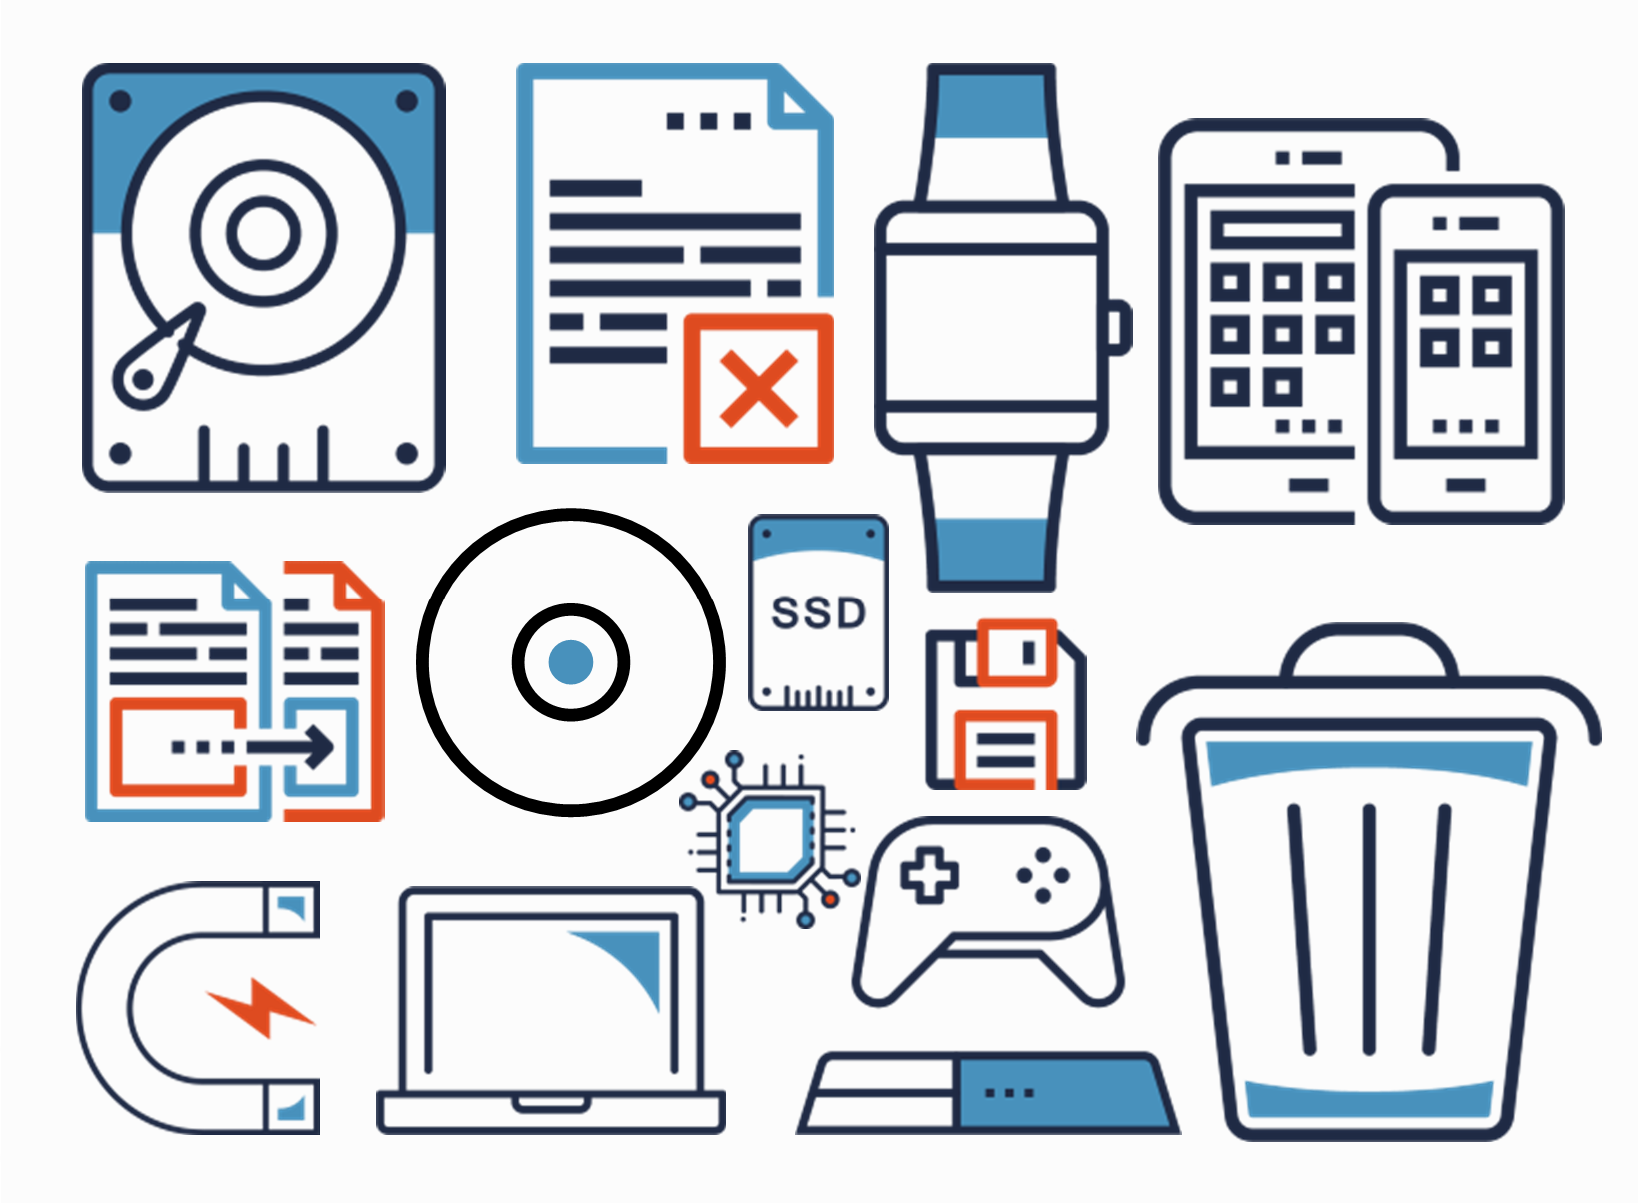 Icons of various types of electronic devices that should be sanitized prior to disposal such as a solid state drive (SSD) and a smart watch.